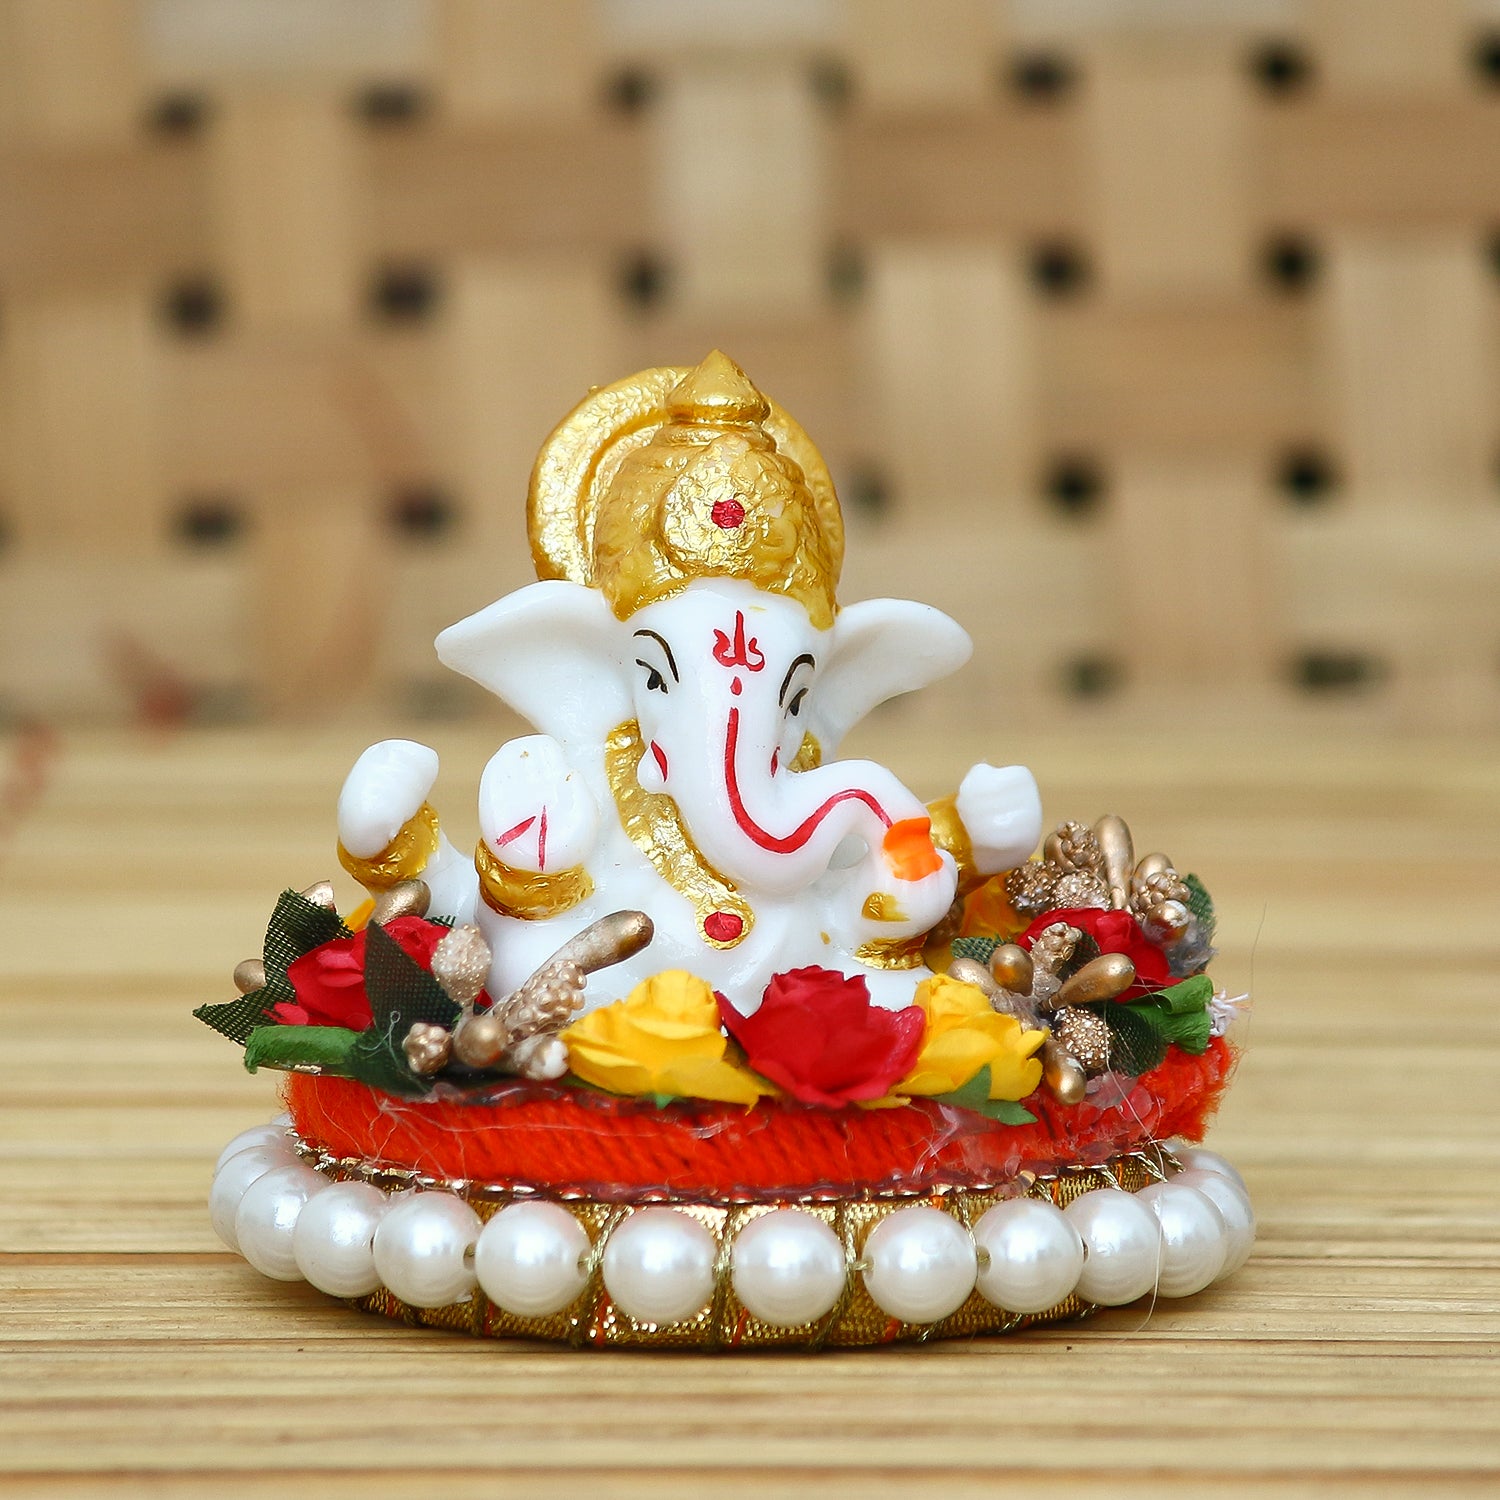 Polyresin Lord Ganesha Statue on Decorative Handcrafted Plate for Home, Office and Car Dashboard 2